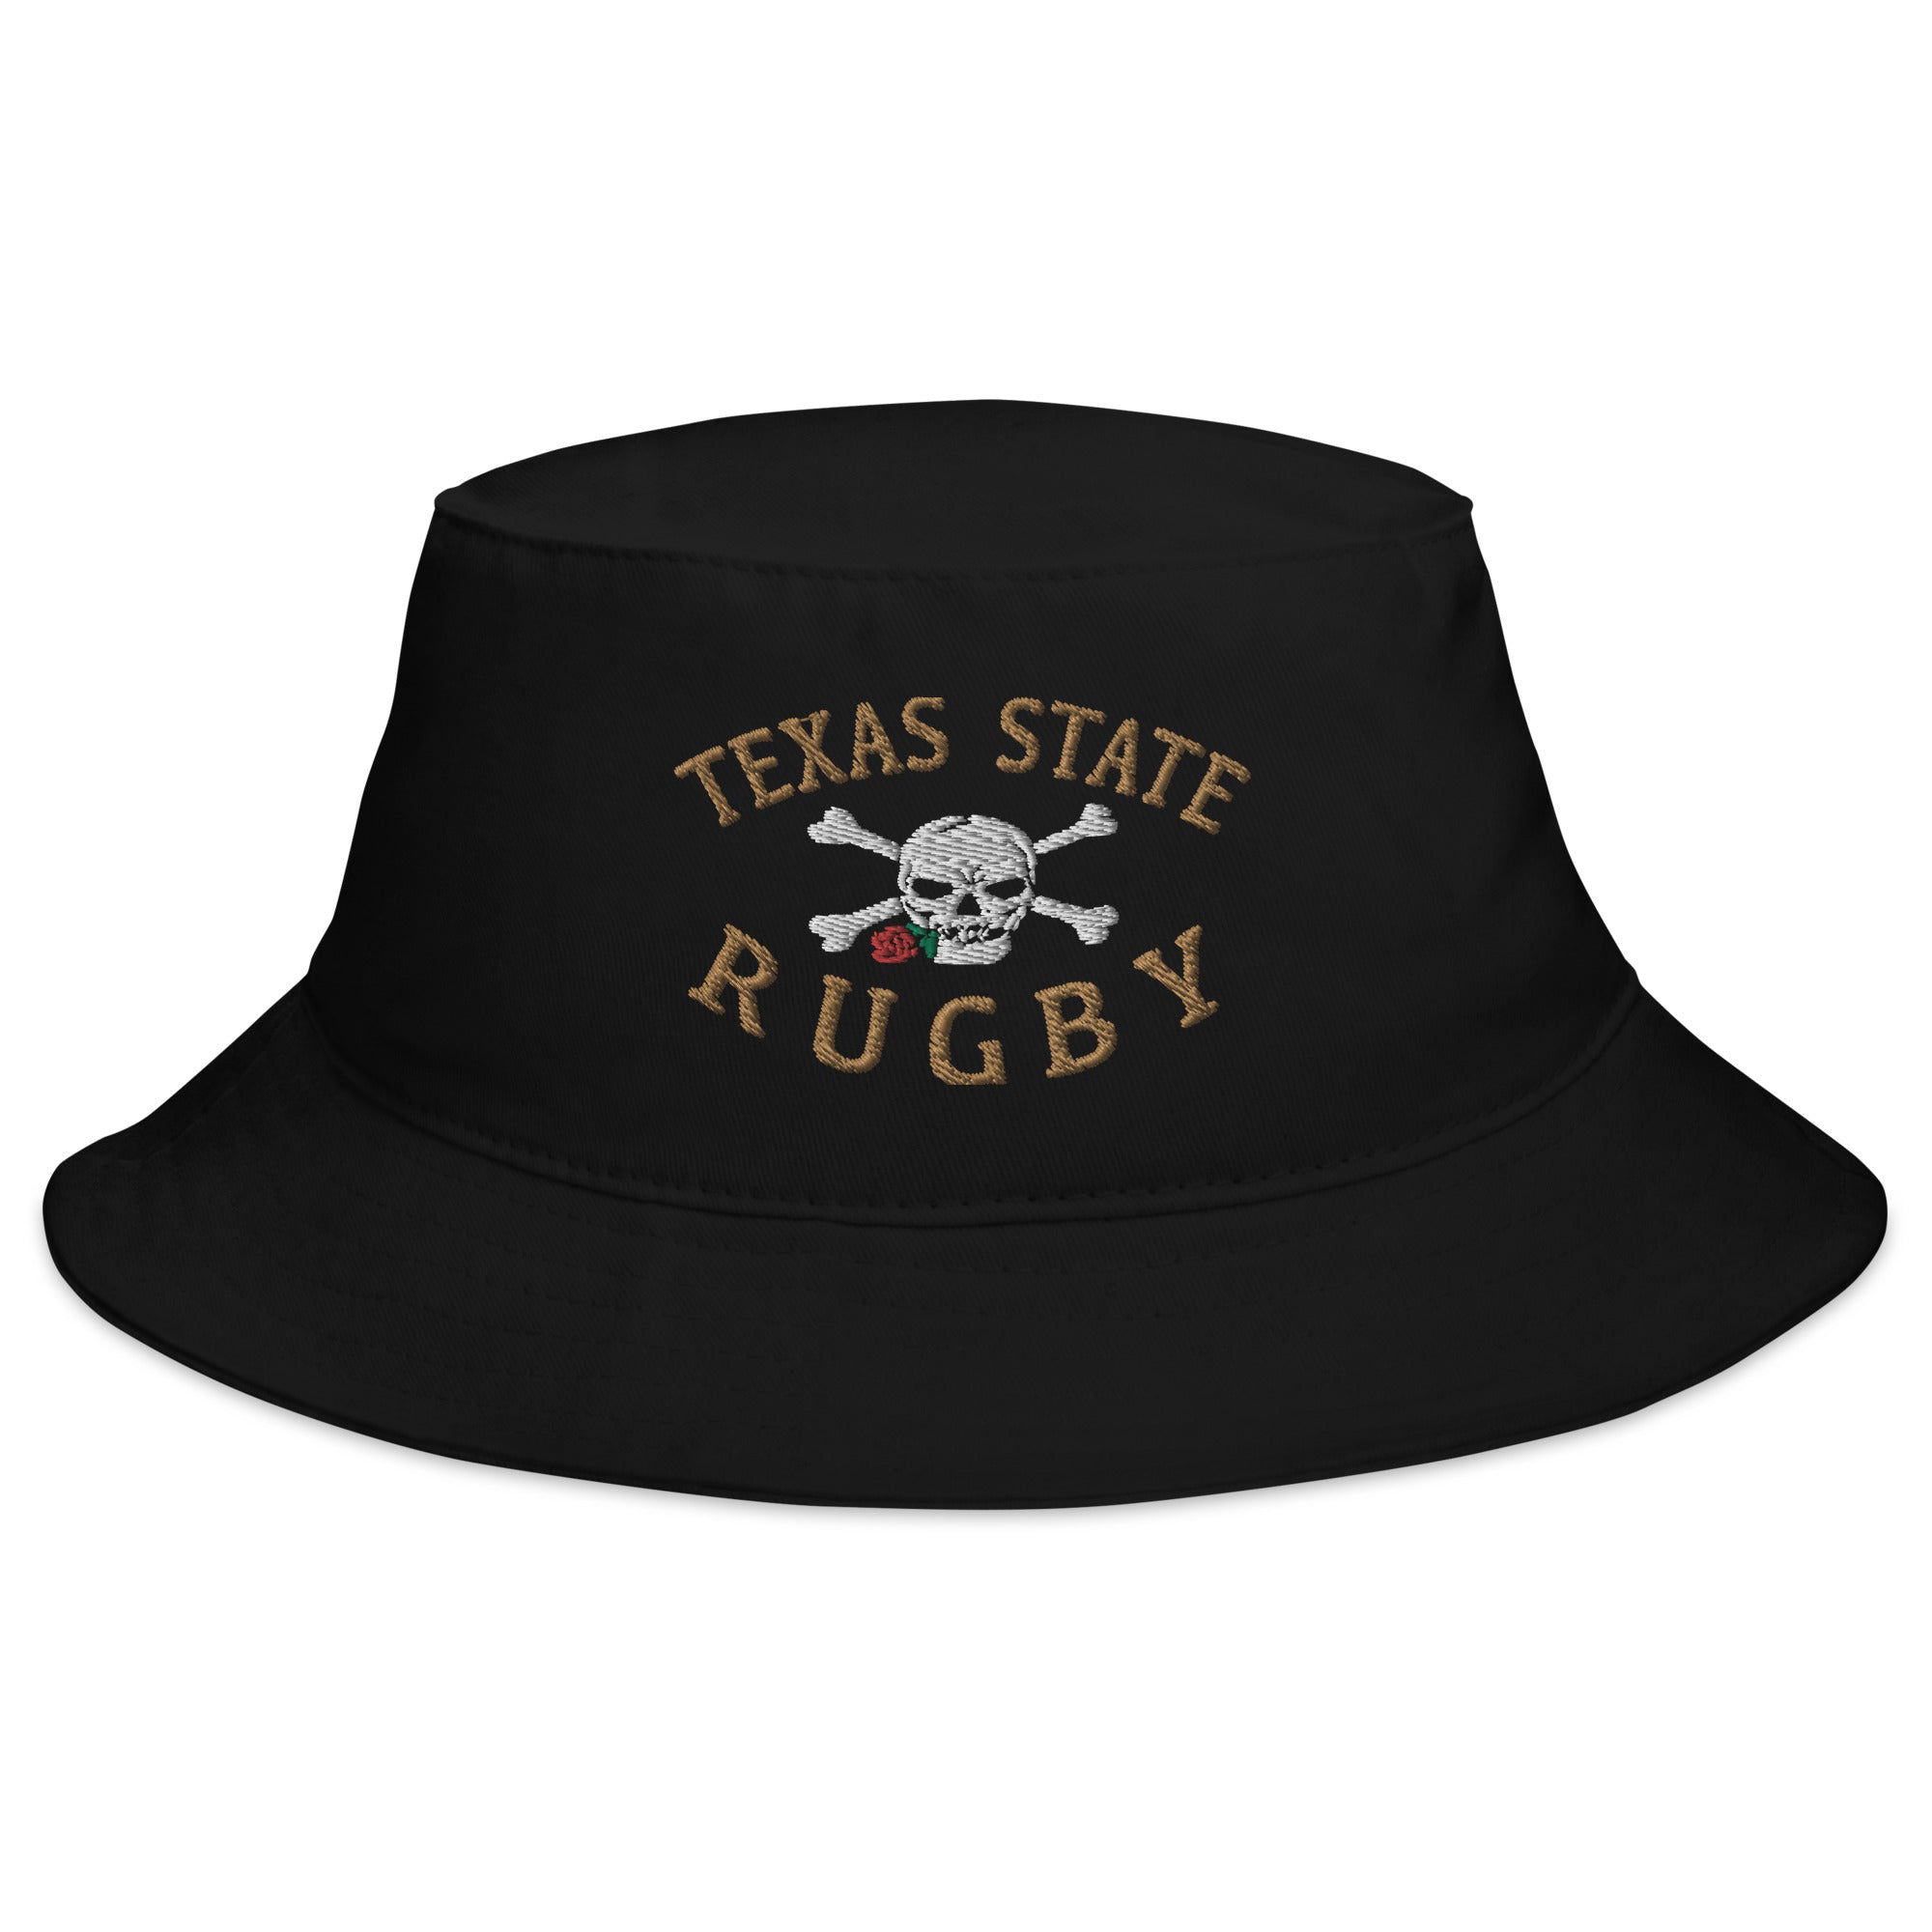 Rugby Imports Texas State Rugby Bucket Hat